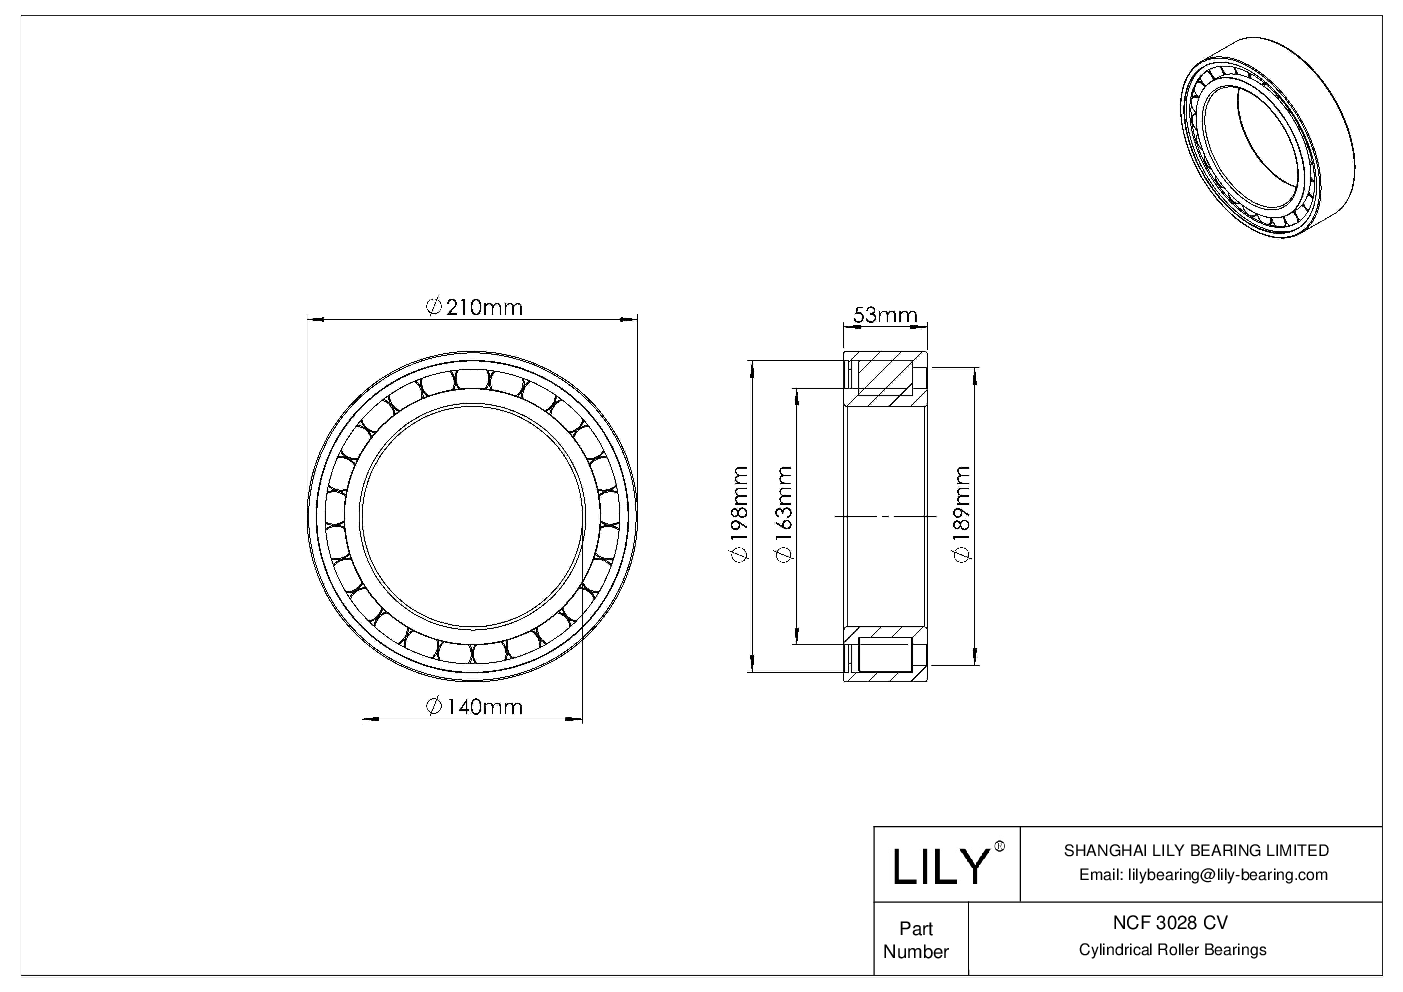 NCF 3028 CV Single Row Full Complement Cylindrical Roller Bearings cad drawing